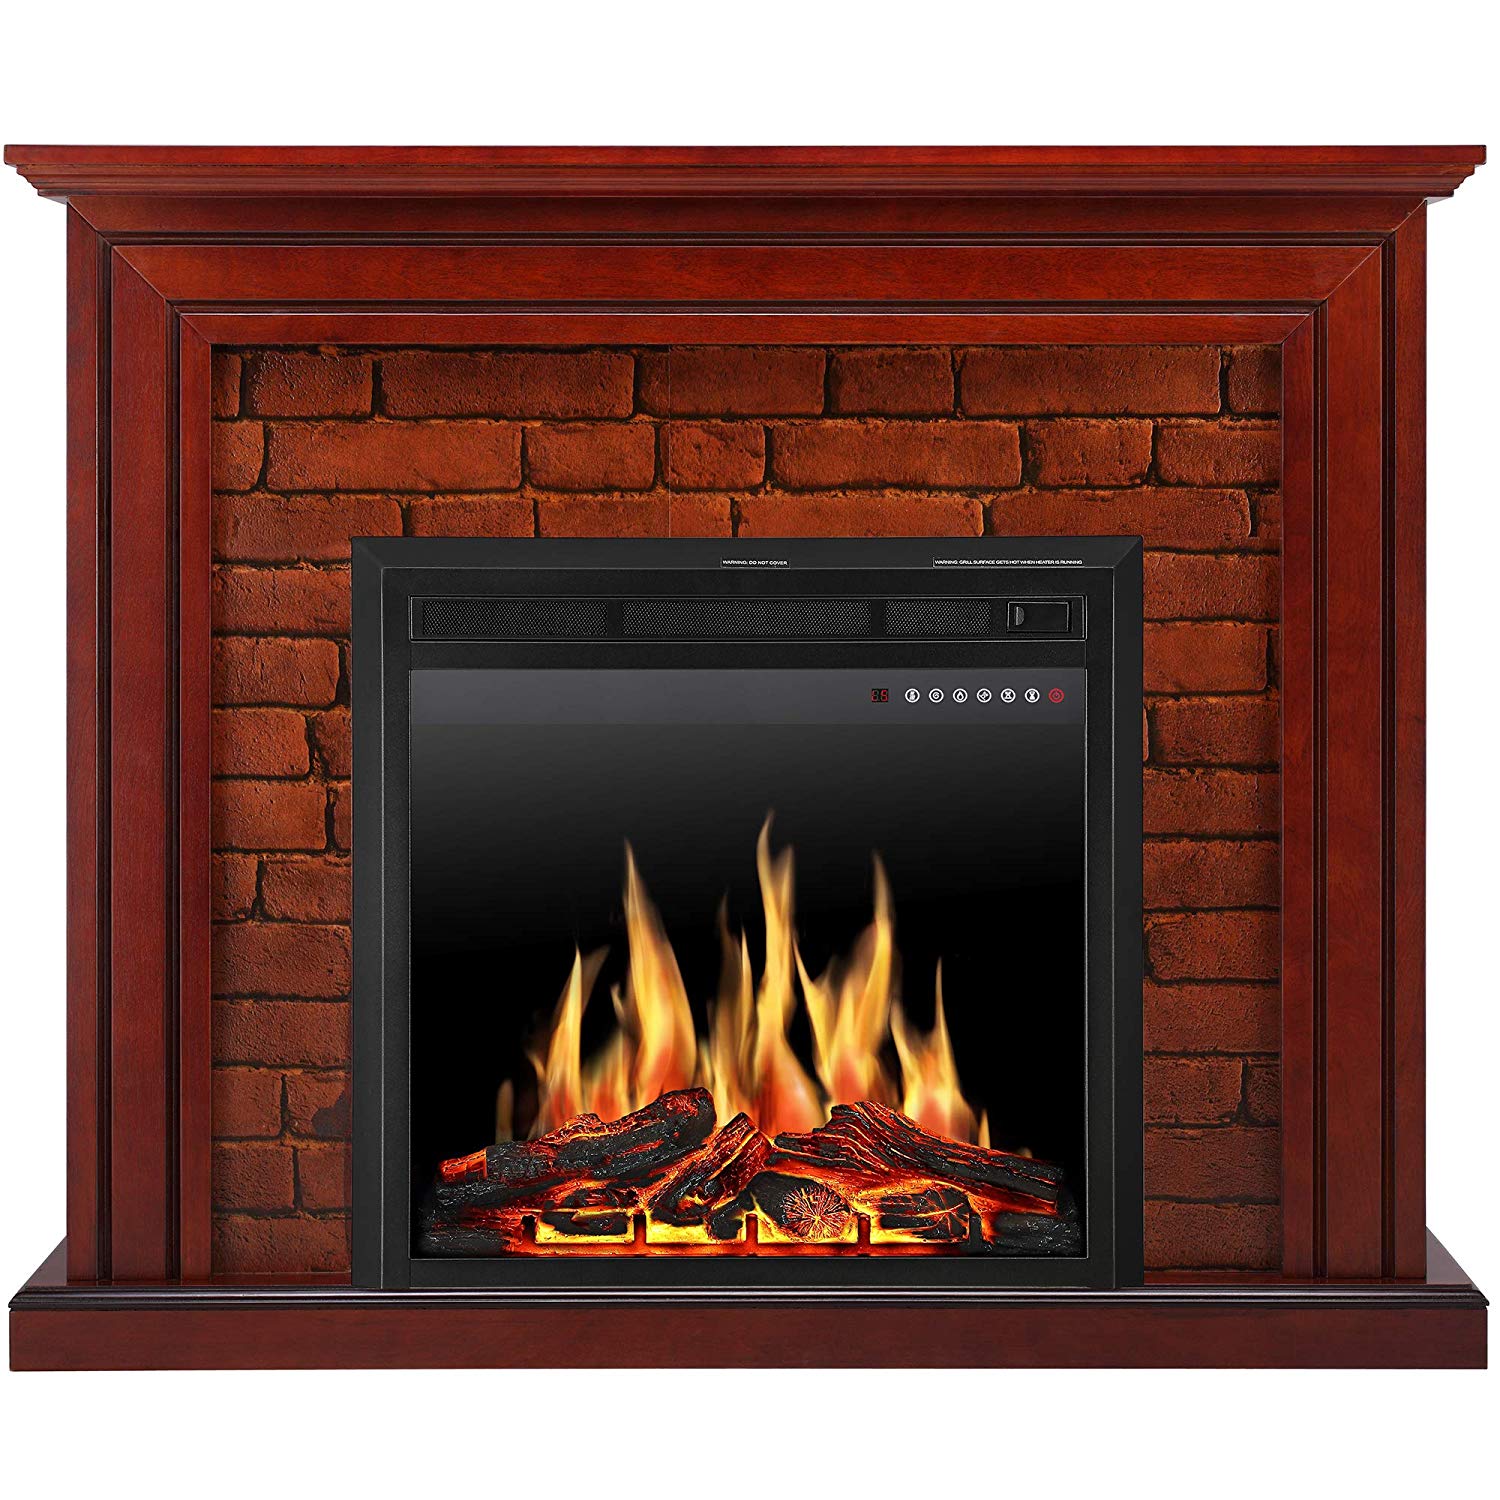 Electric Fireplace Heaters with thermostat Unique Jamfly Electric Fireplace Mantel Package Traditional Brick Wall Design Heater with Remote Control and Led touch Screen Home Accent Furnishings